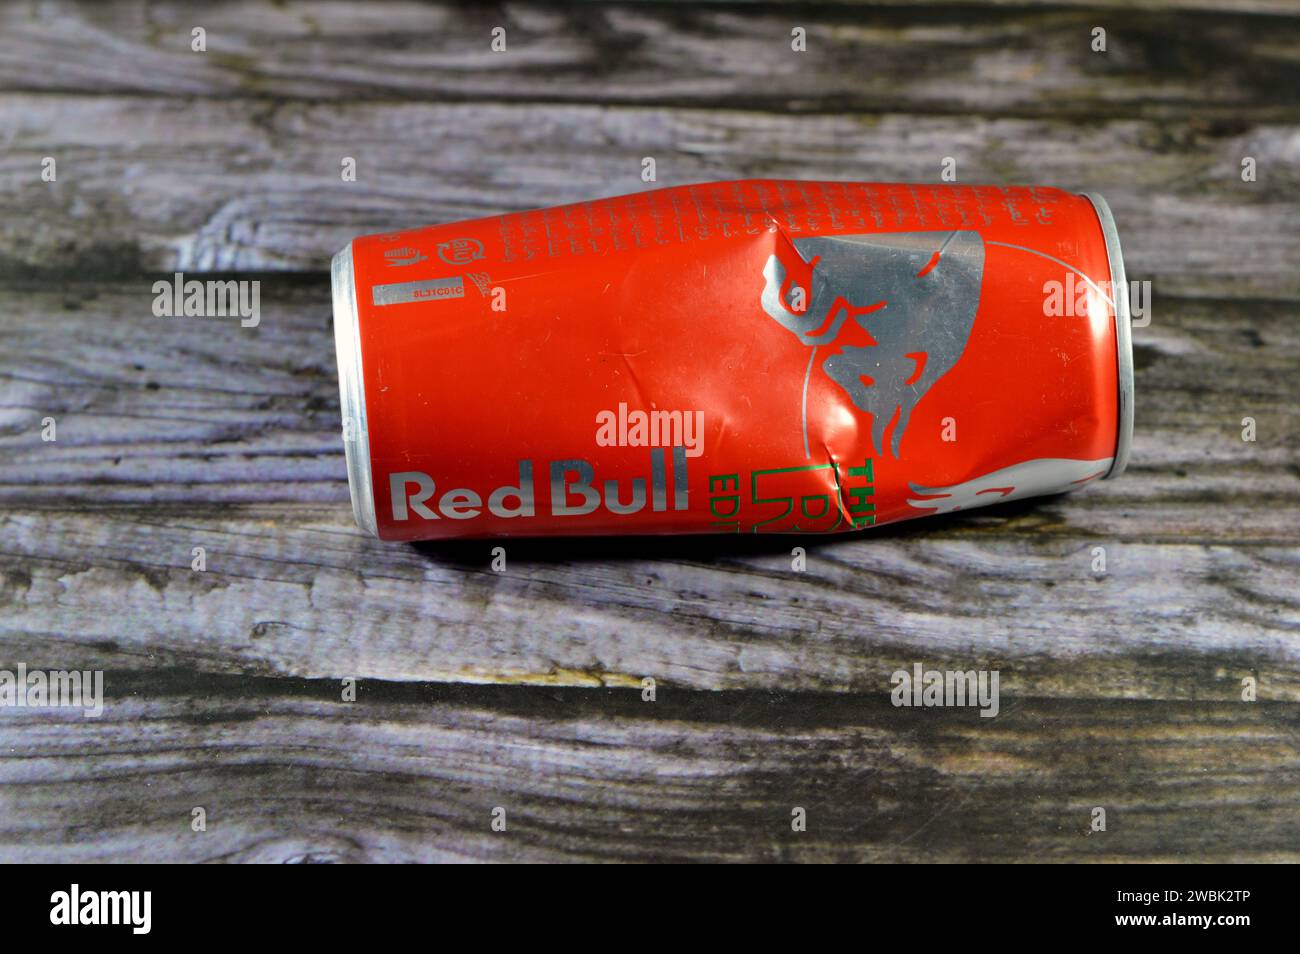 Cairo, Egypt, January 9 2024: Crushed dented Red Bull energy drink, a brand of energy drinks created and owned by the Austrian company Red Bull GmbH, Stock Photo